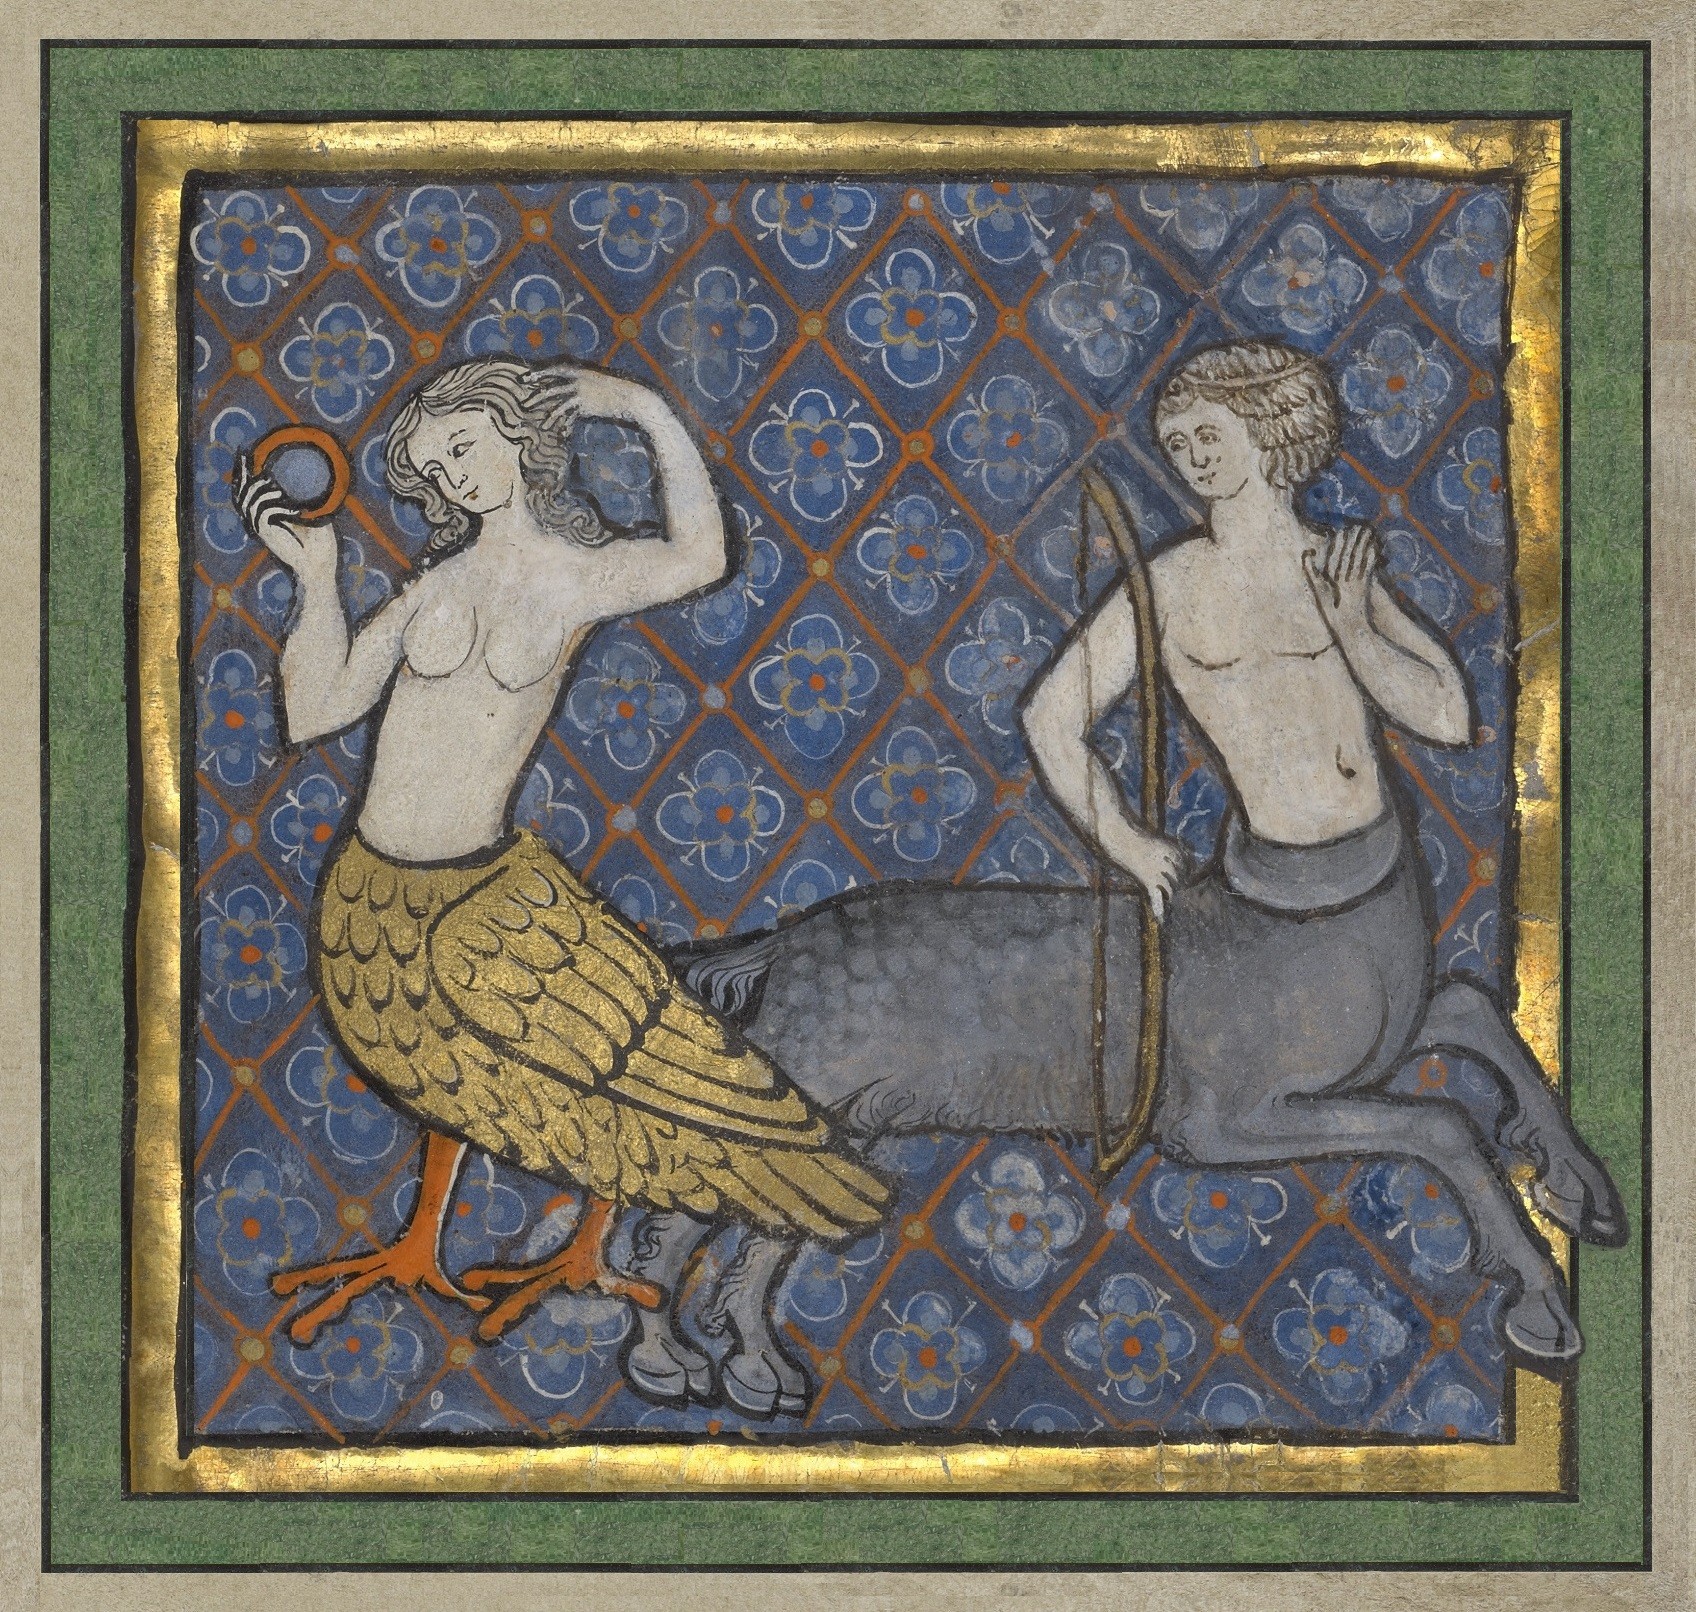 Vanity and Hypocrisy, c.1270, Tempera colors, gold leaf, and ink on parchment